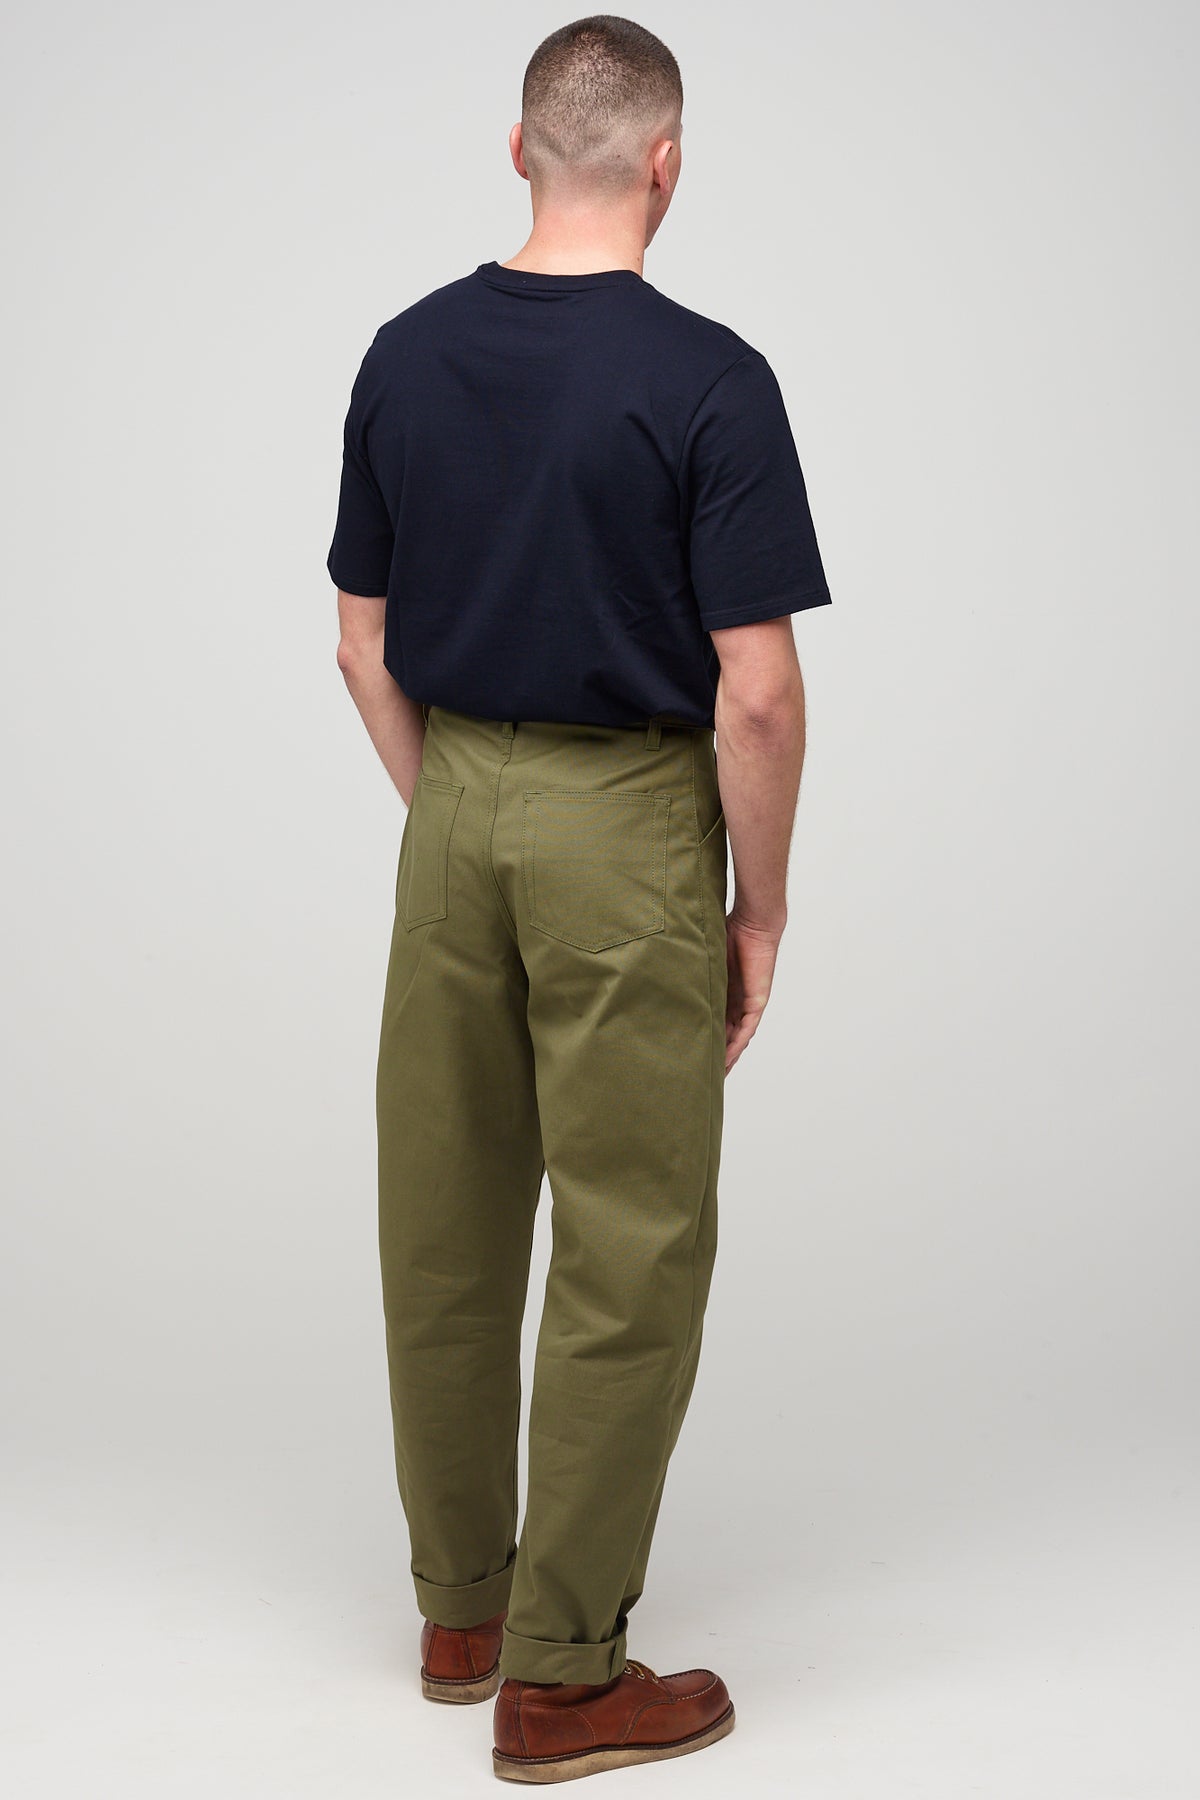 
            Brunette, white male wearing chore trousers in olive